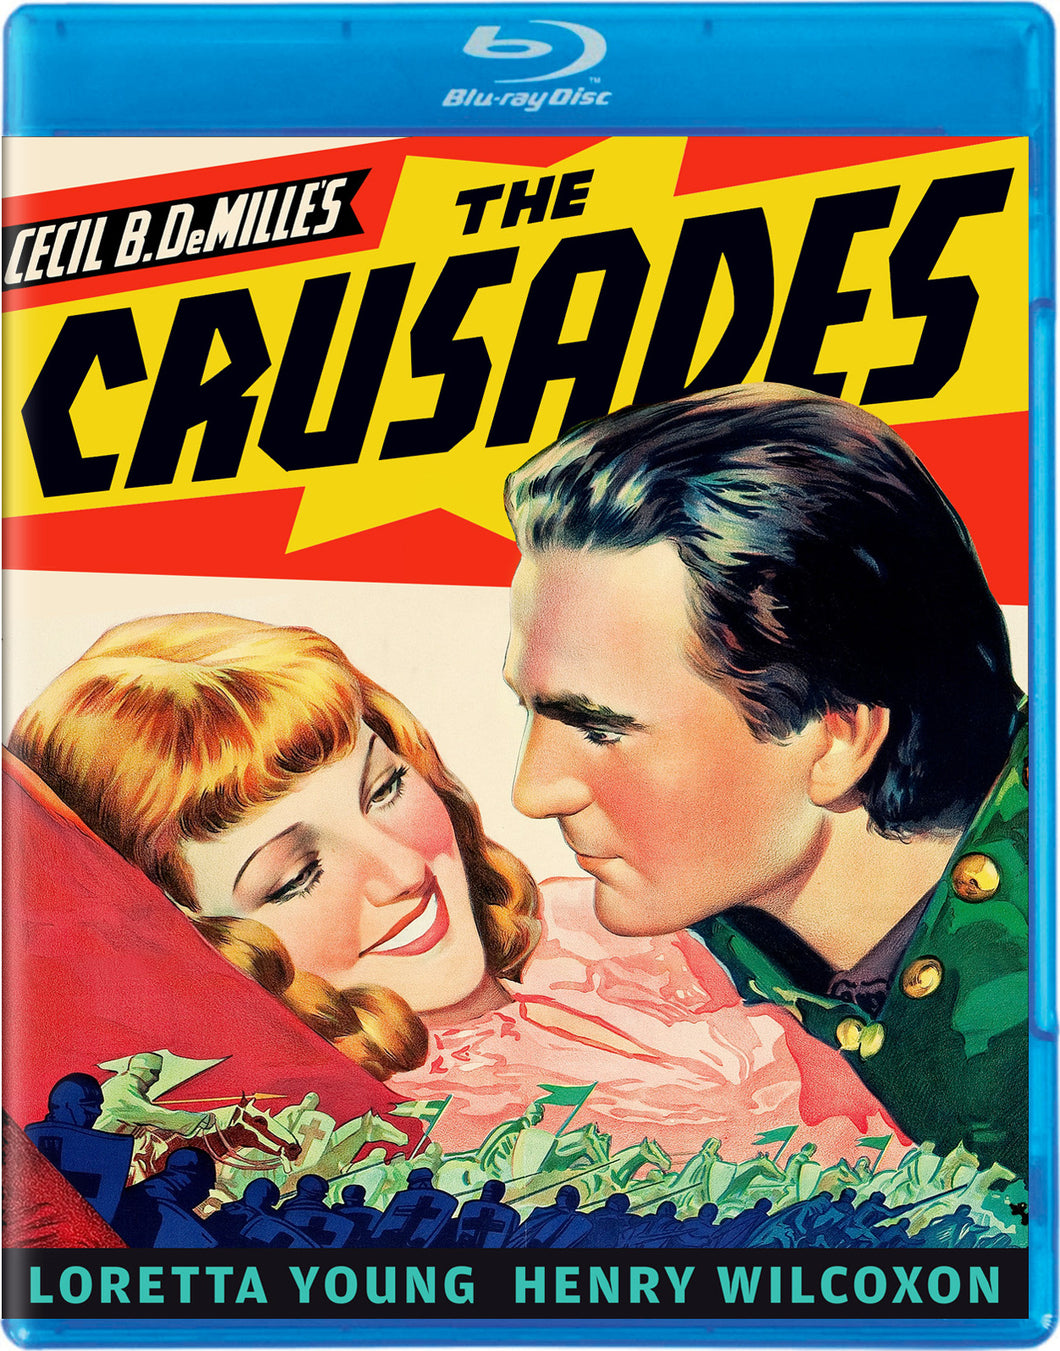 The Crusades (1935) de Cecil B. DeMille - front cover